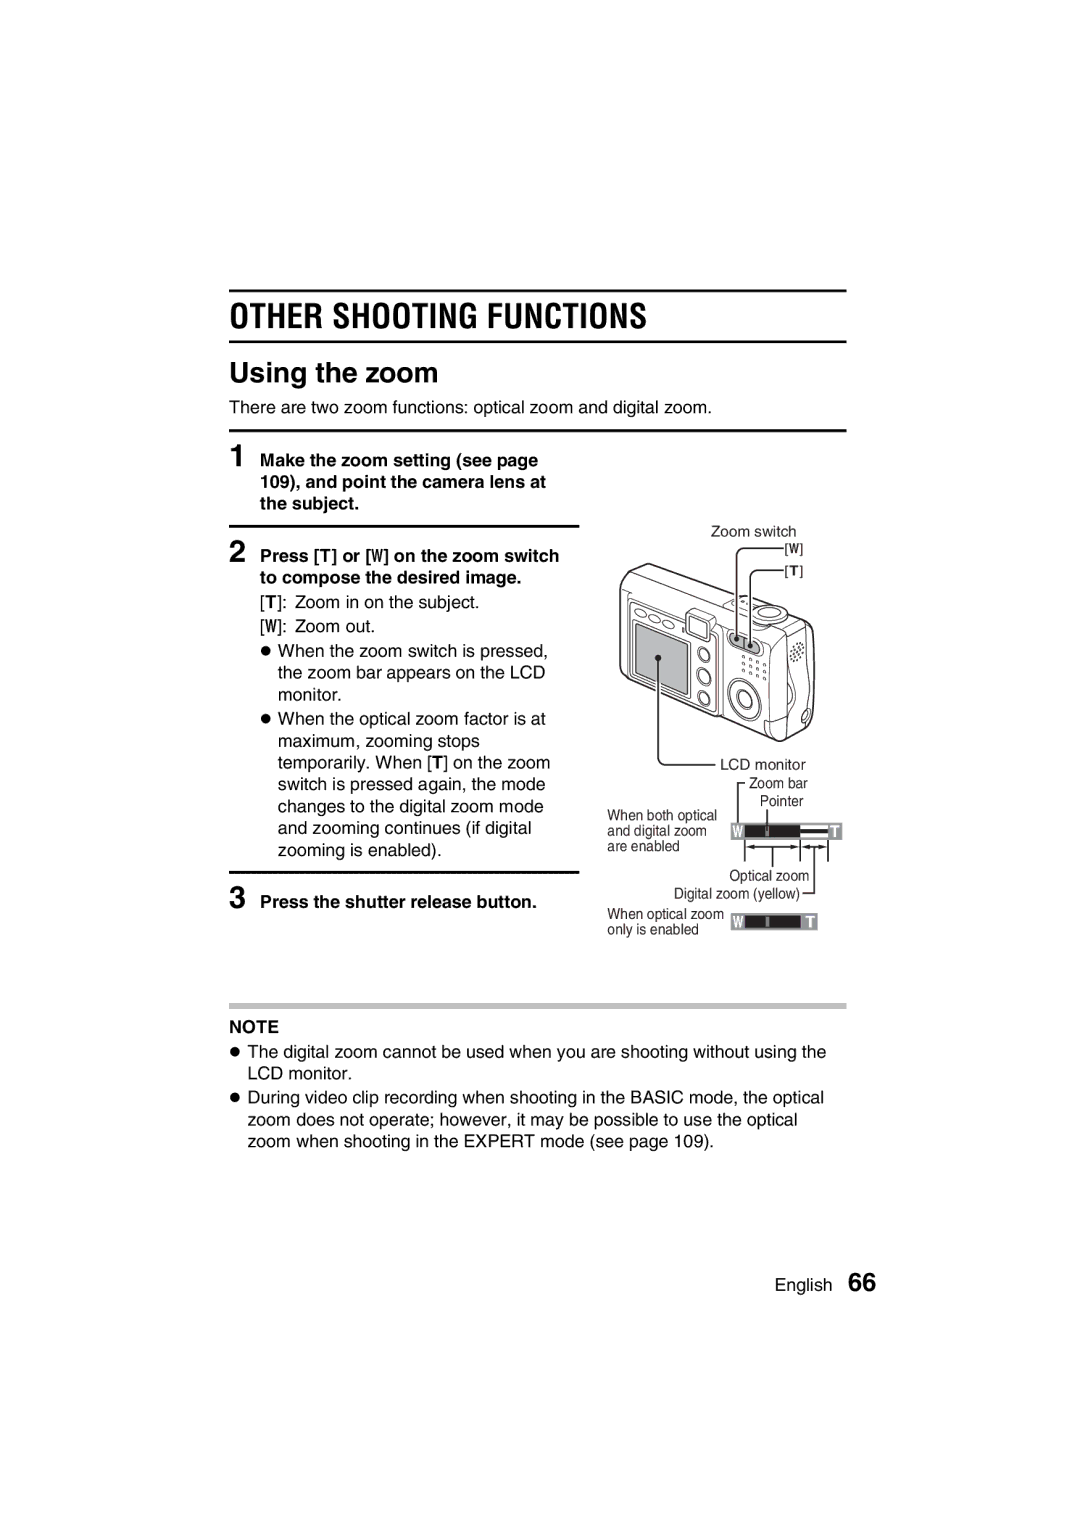 Sanyo VPC-J1EX instruction manual Other Shooting Functions, Using the zoom 